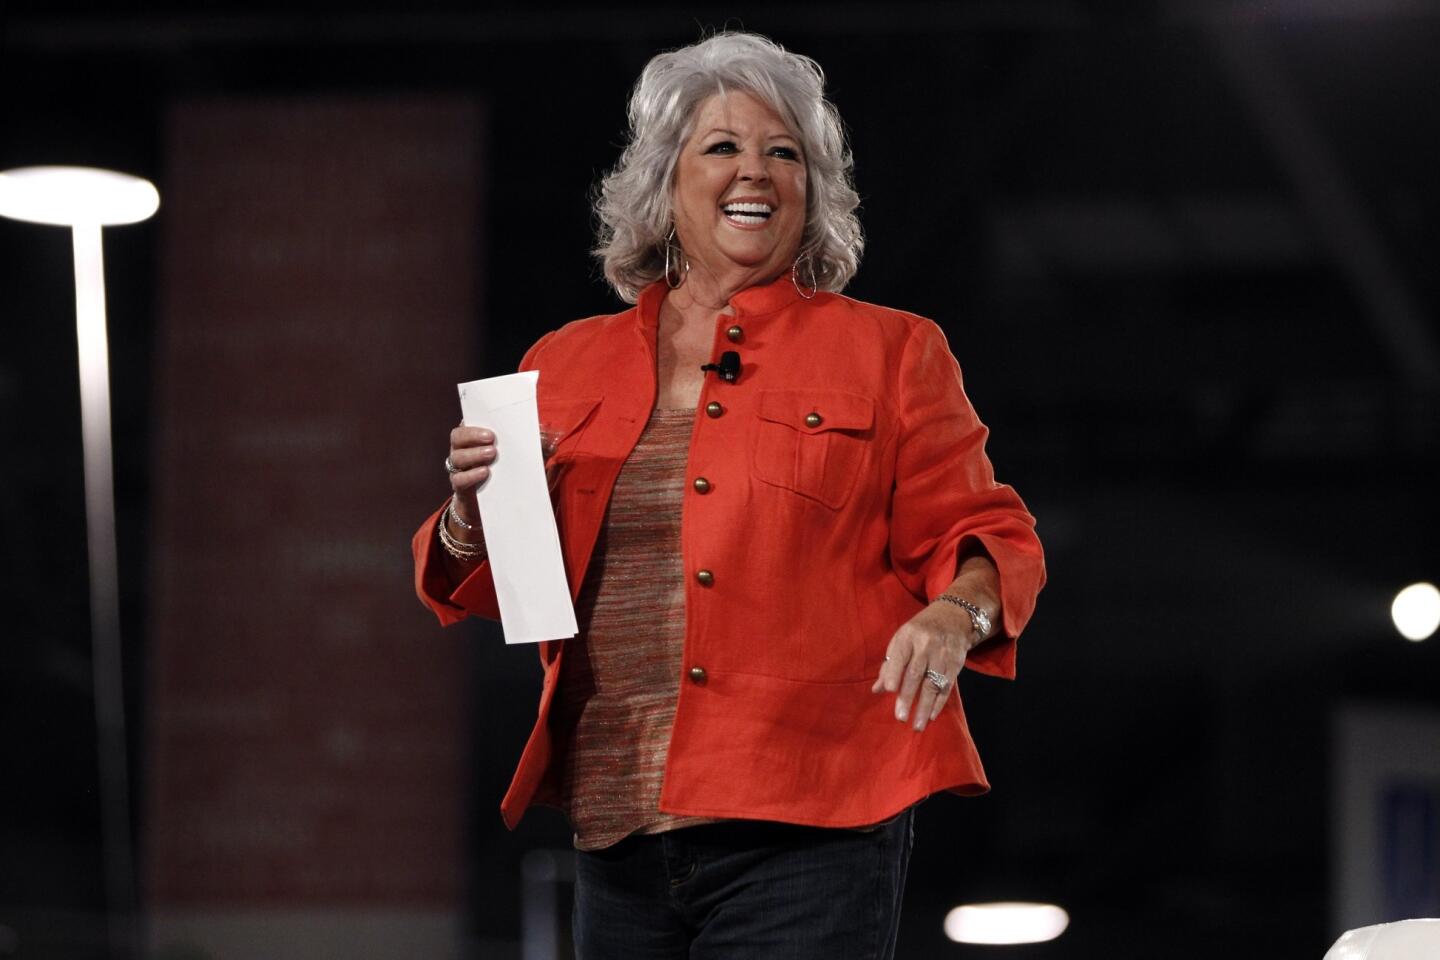 Paula Deen - If you missed me on ShopHQ last Sunday, you're in luck! I've  got a new episode of Sweet Home Savannah this Sunday, and every Sunday, at  7PM EST! Let's